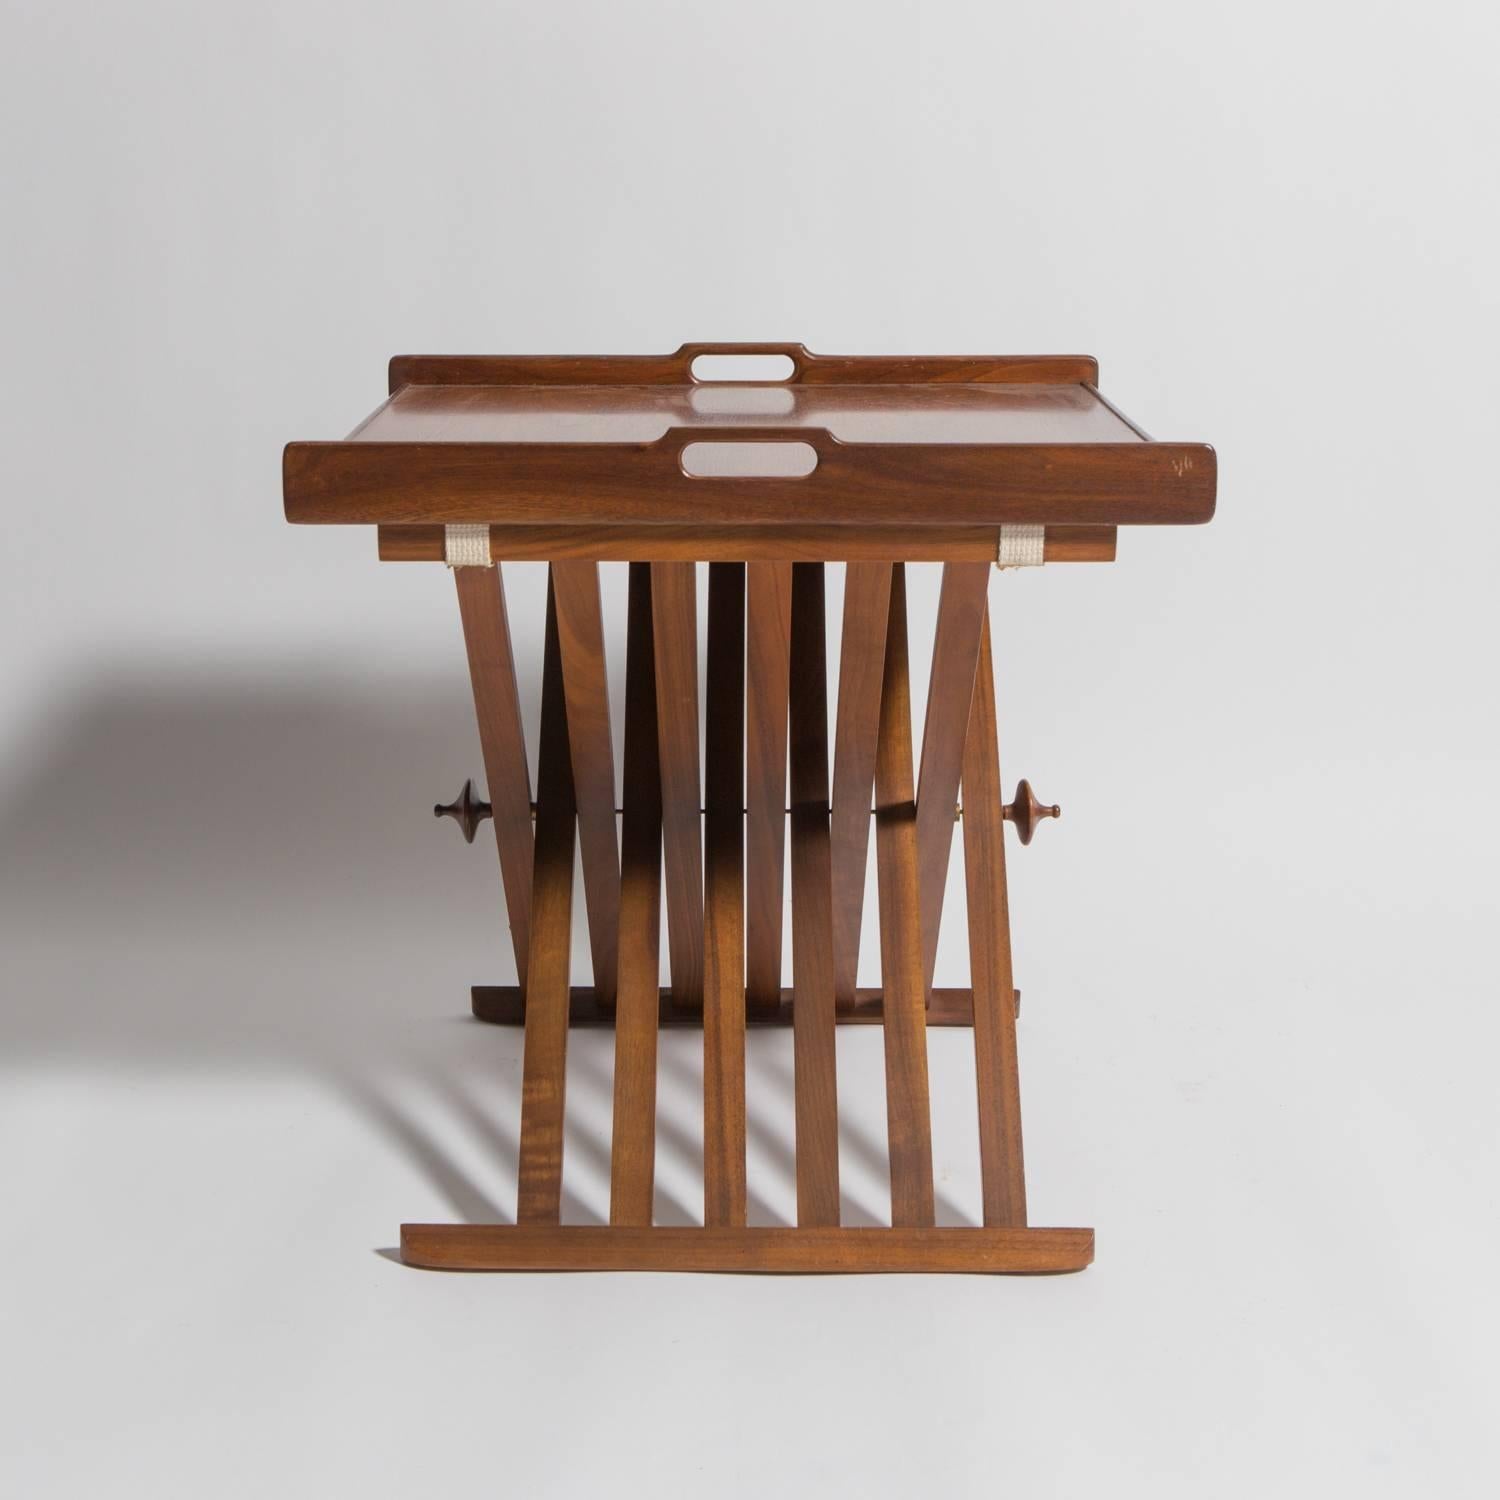 Pair of walnut folding Campaign tray tables by Stewart MacDougall for Drexel. Removable tray top with carved handles and elegant touch finials at the leg axis.